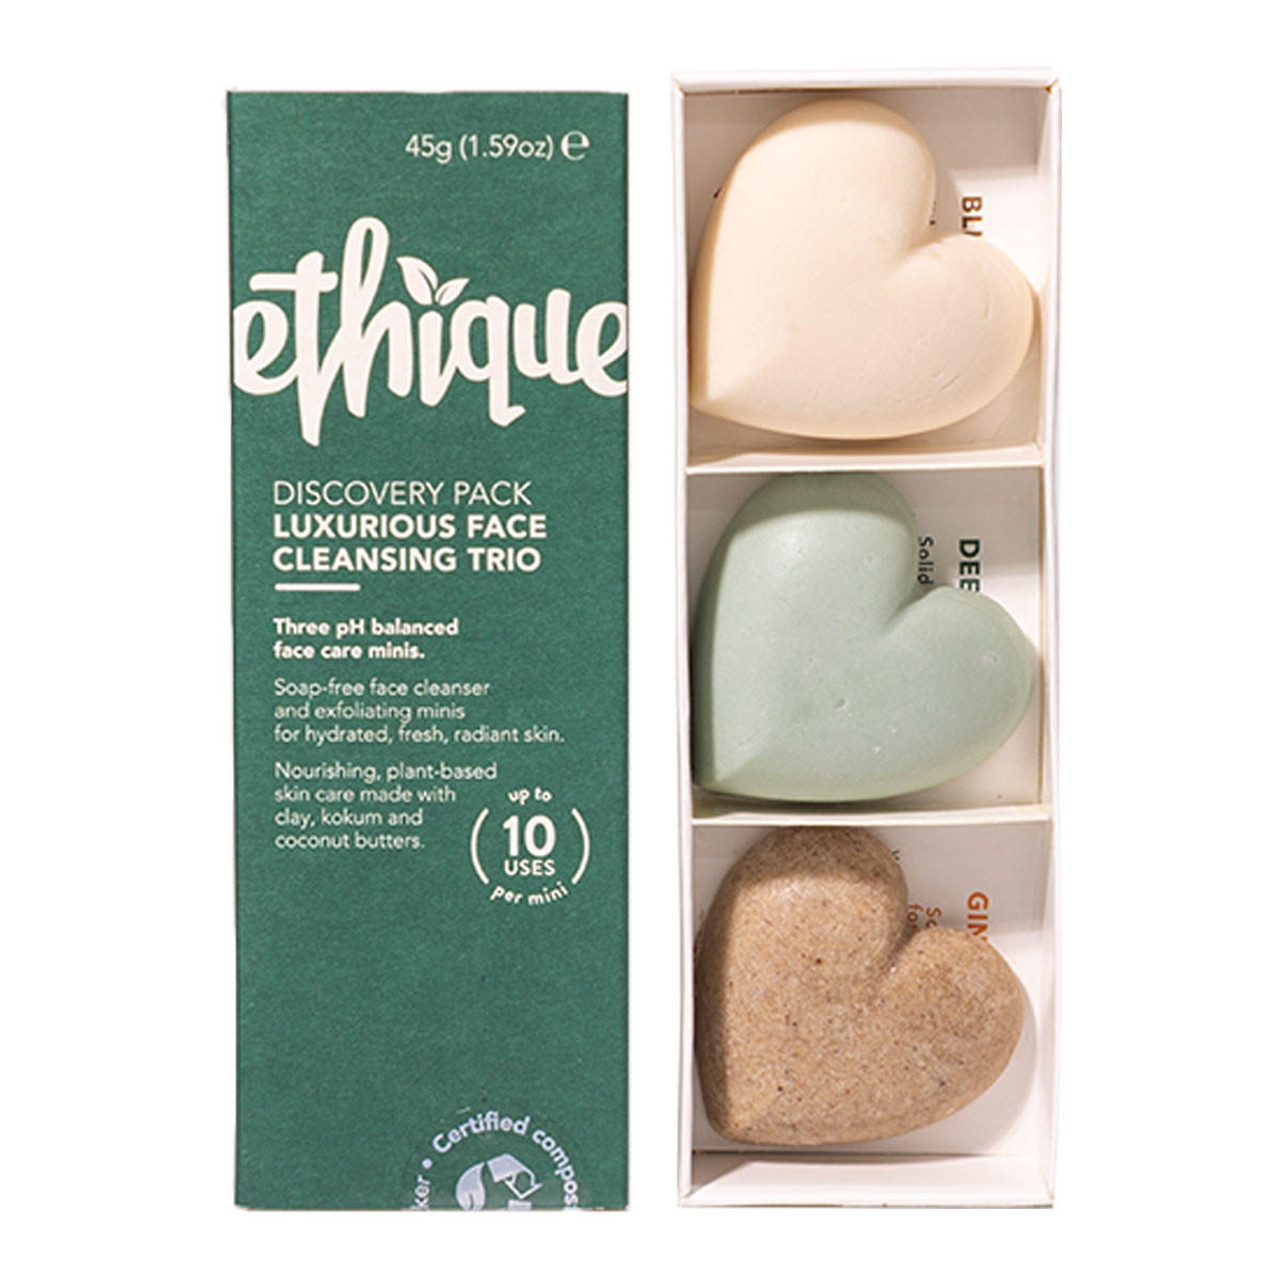 Ethique – Discovery Pack – Luxurious Face Cleansing Trio